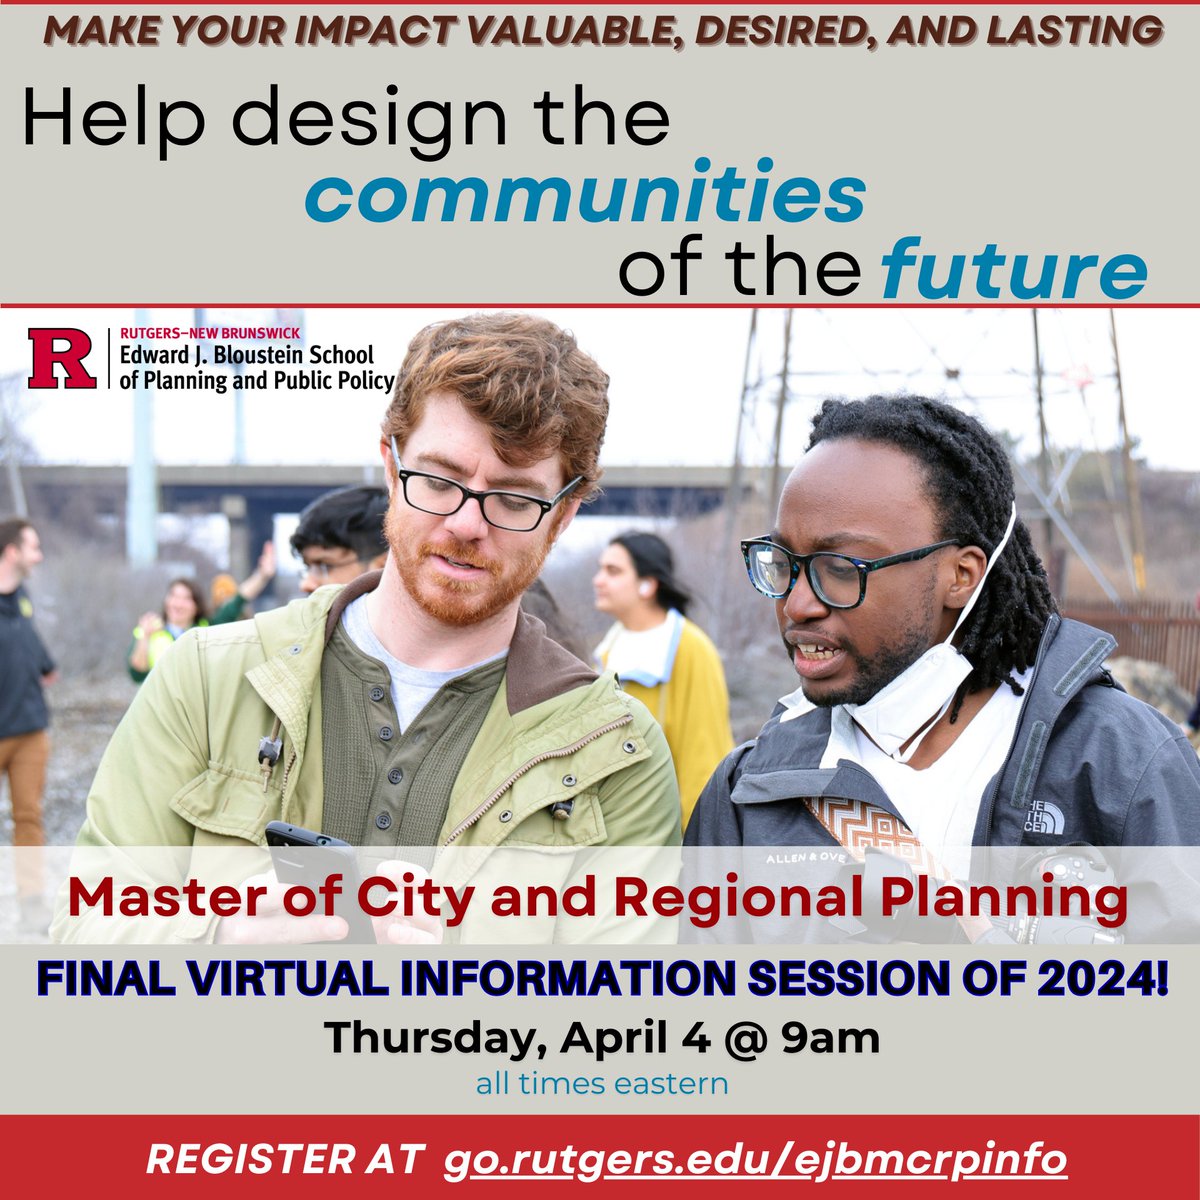 Help design the communities of the future with a Master of City and Regional Planning. Join our FINAL virtual informational session for the spring on Thurs., April 4 at 6:00 p.m. Register go.rutgers.edu/ejbmcrpinfo 🎇 🎇 Ranked #3 nationally and #1 in NJ by Planetizen! 🎇 🎇